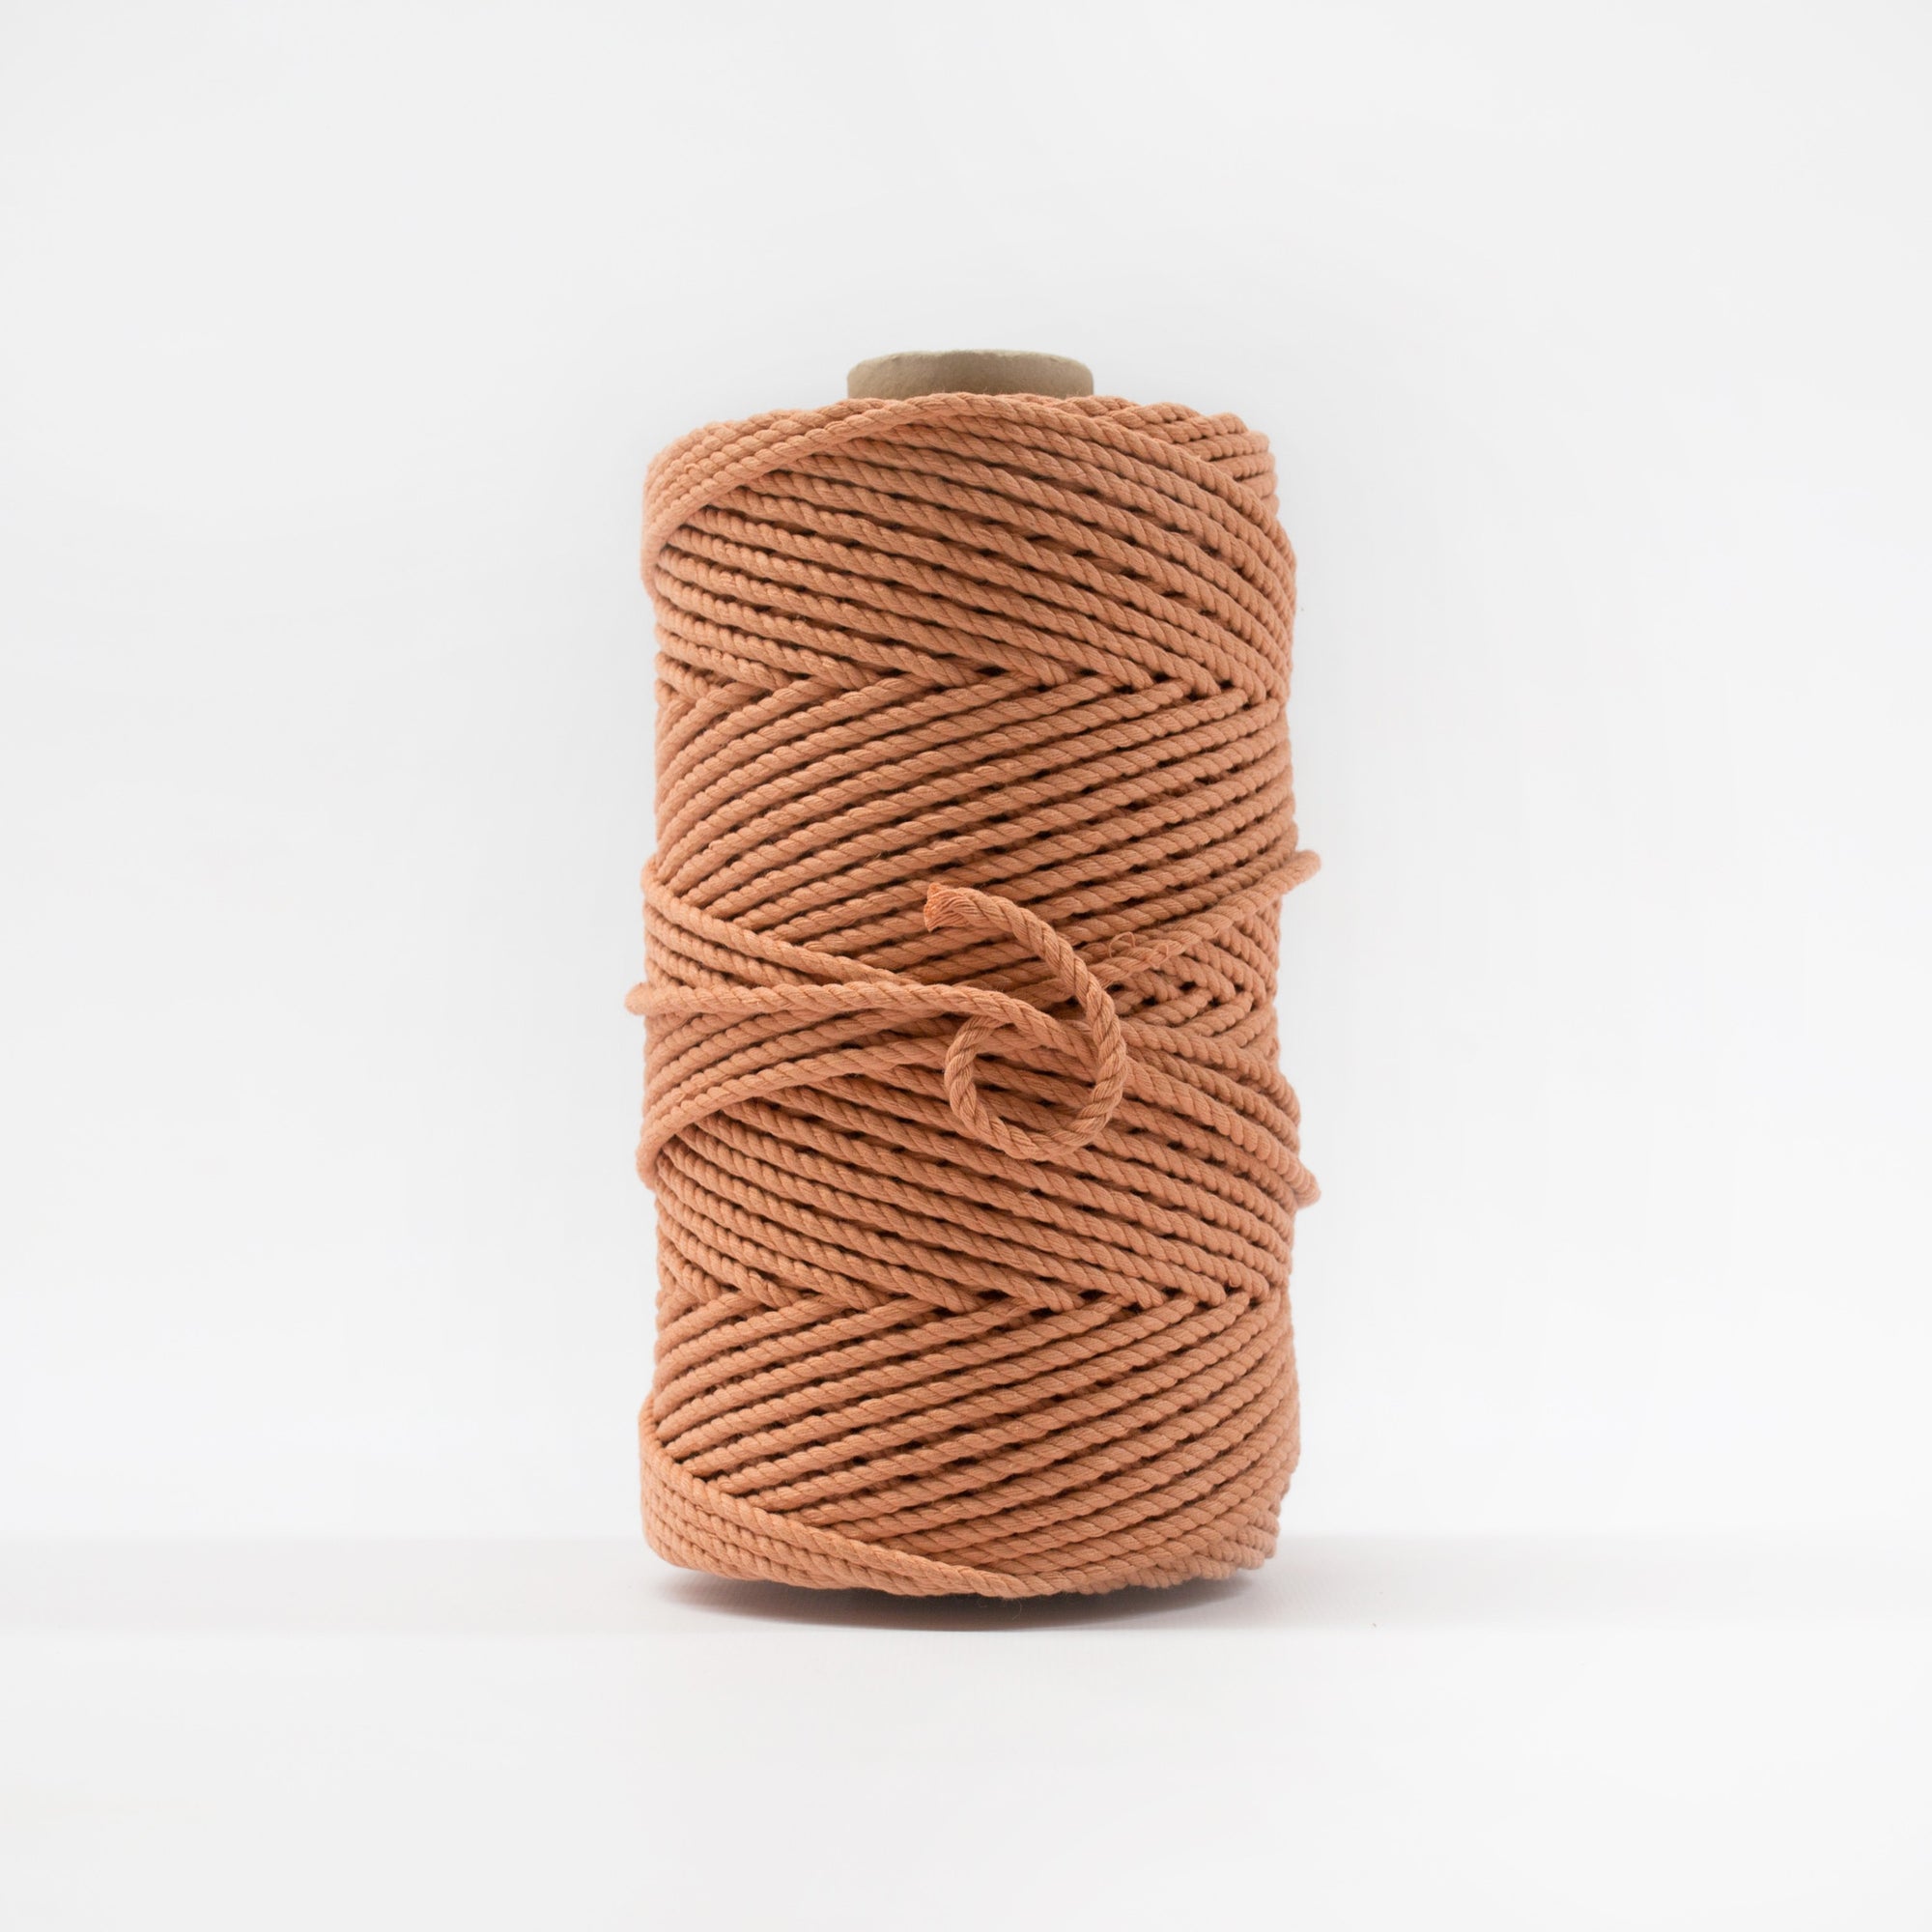 Mary Maker Studio Luxe Colour Cotton 4mm 1KG Recycled Luxe Macrame Rope // Peach macrame cotton macrame rope macrame workshop macrame patterns macrame